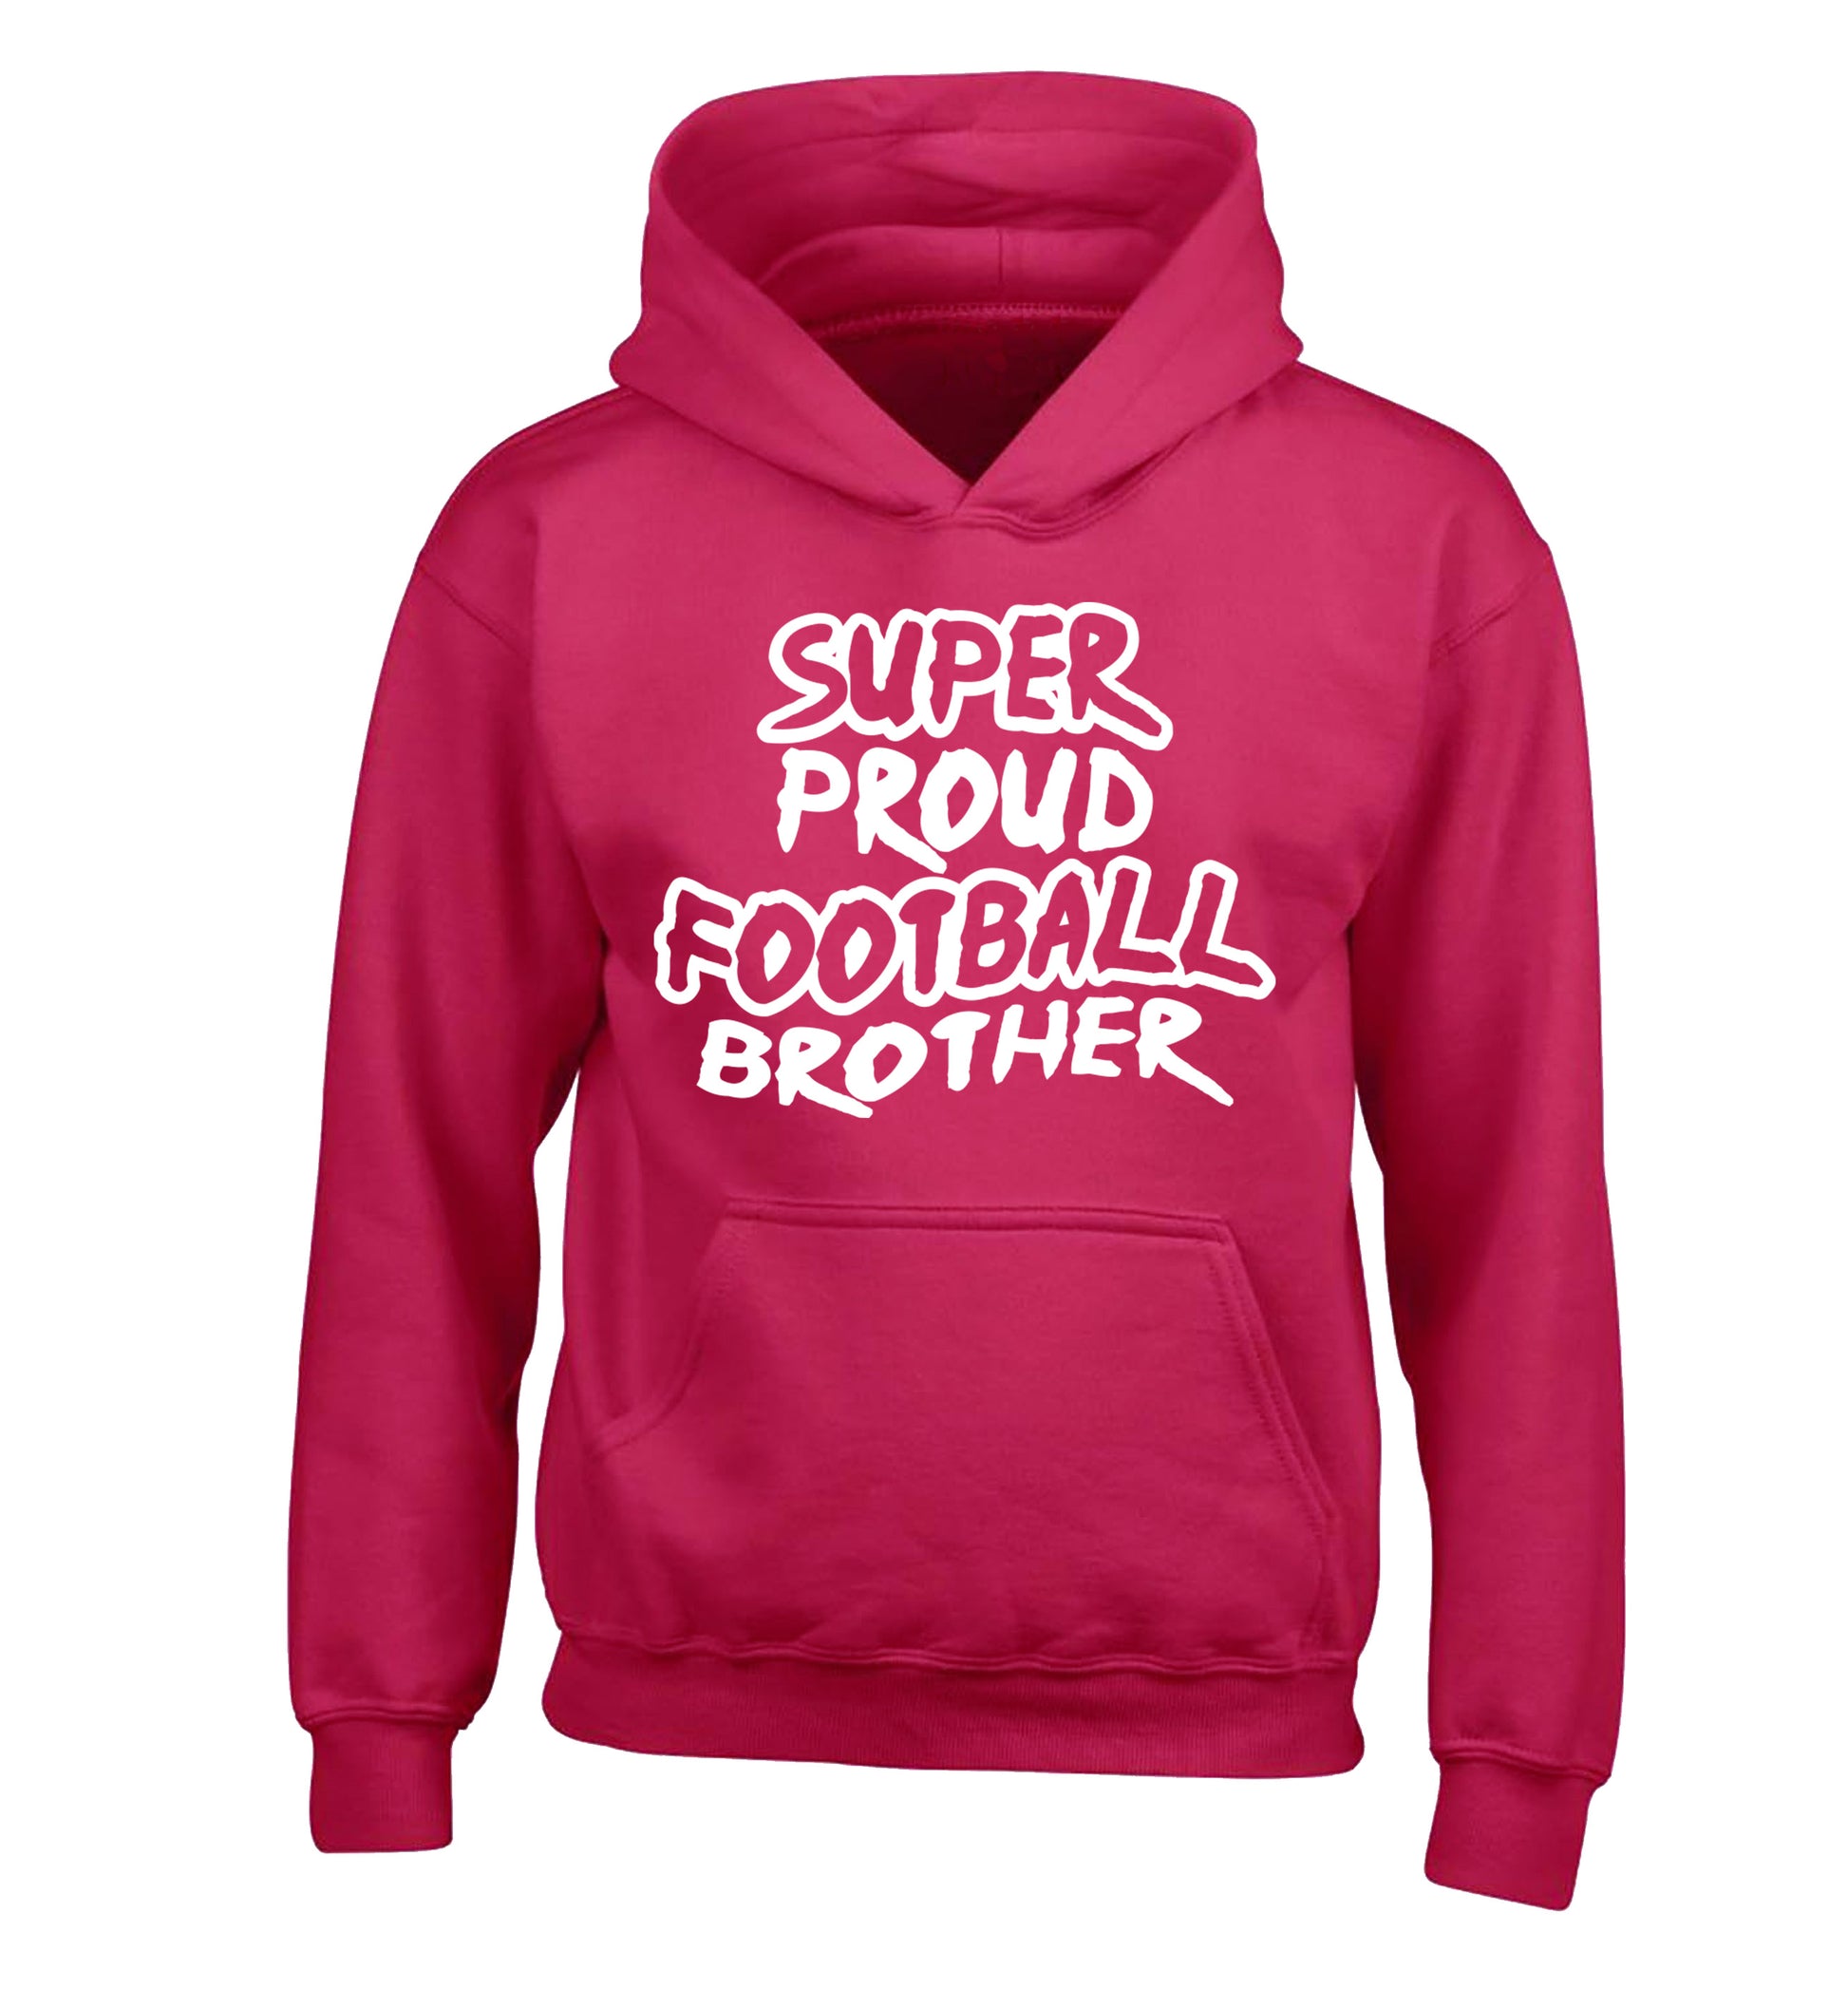 Super proud football brother children's pink hoodie 12-14 Years